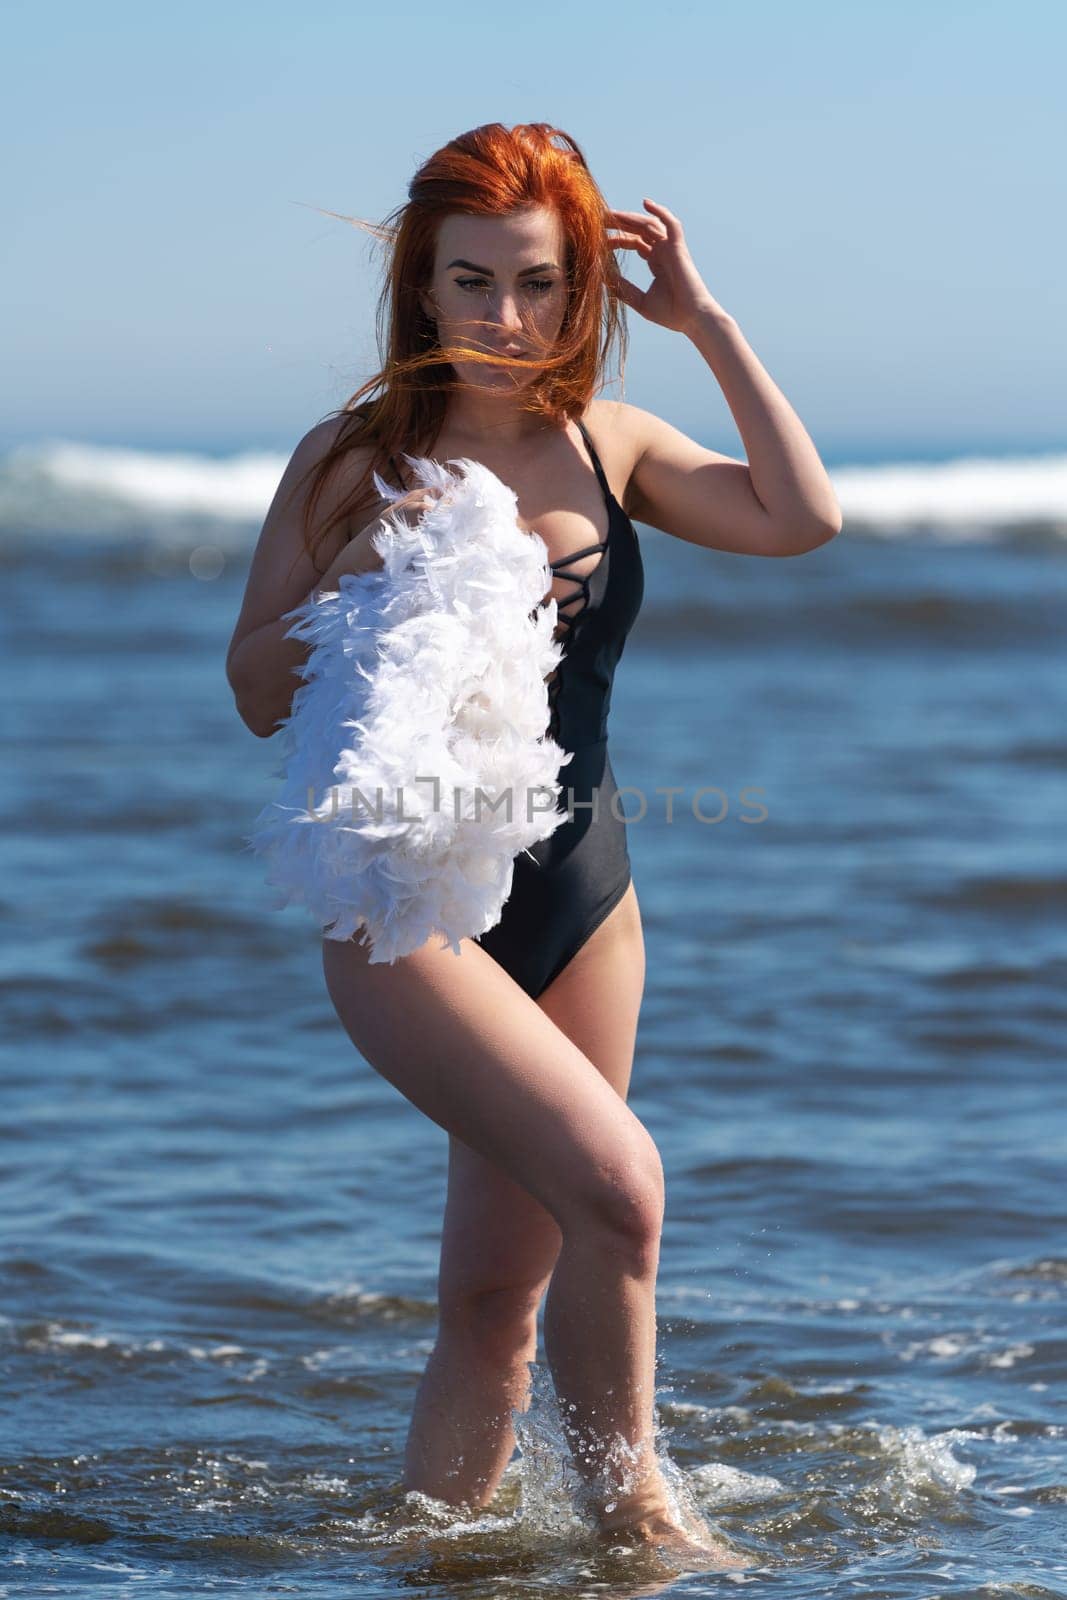 Redhead woman on beach in black one piece swimsuit walks ankle deep into waves of ocean and holds feather boa in hand, straightening her hair in wind with other hand. Woman looking down at sea waves